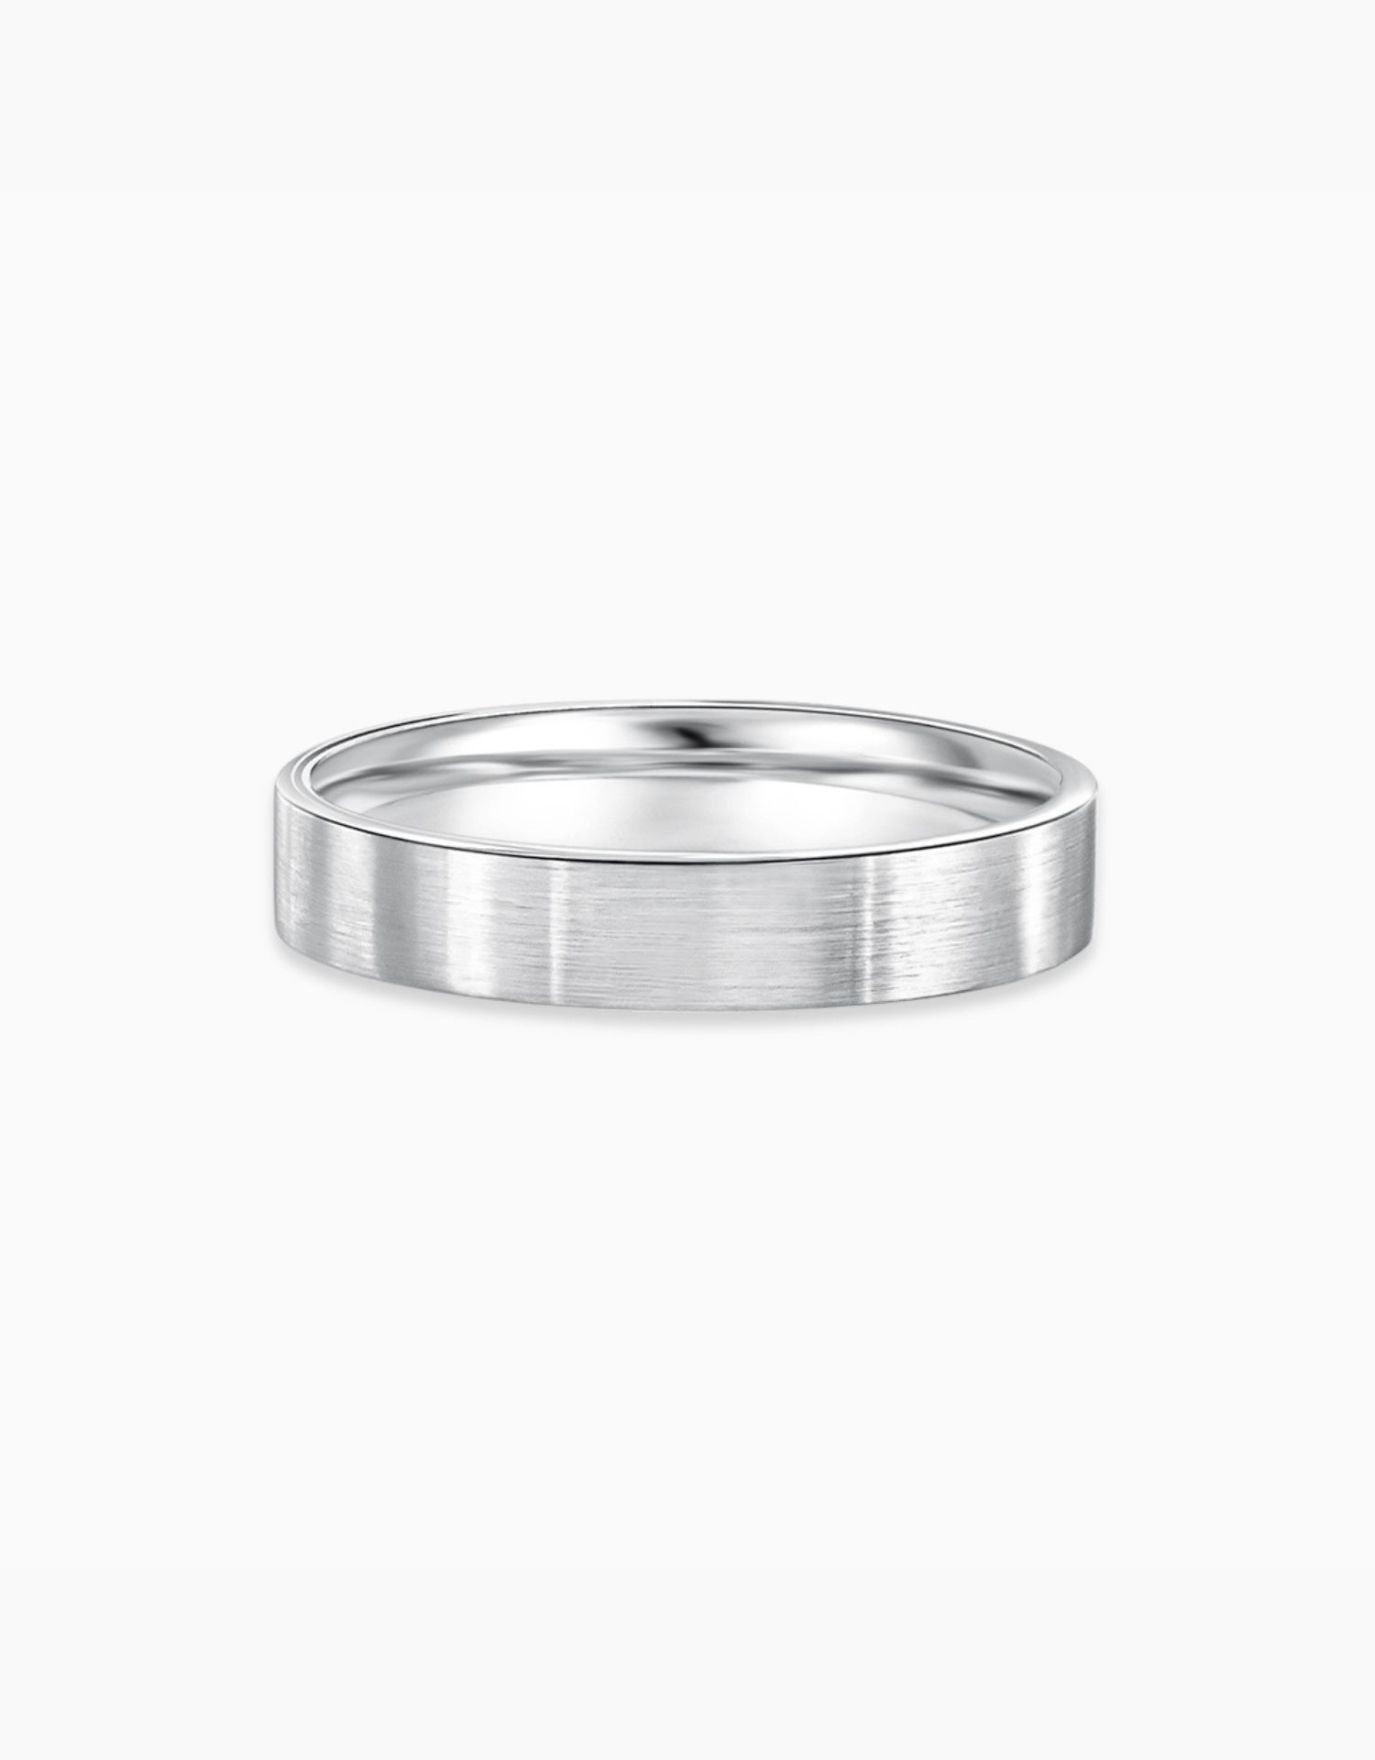 LVC Classique wedding band with a brushed finish